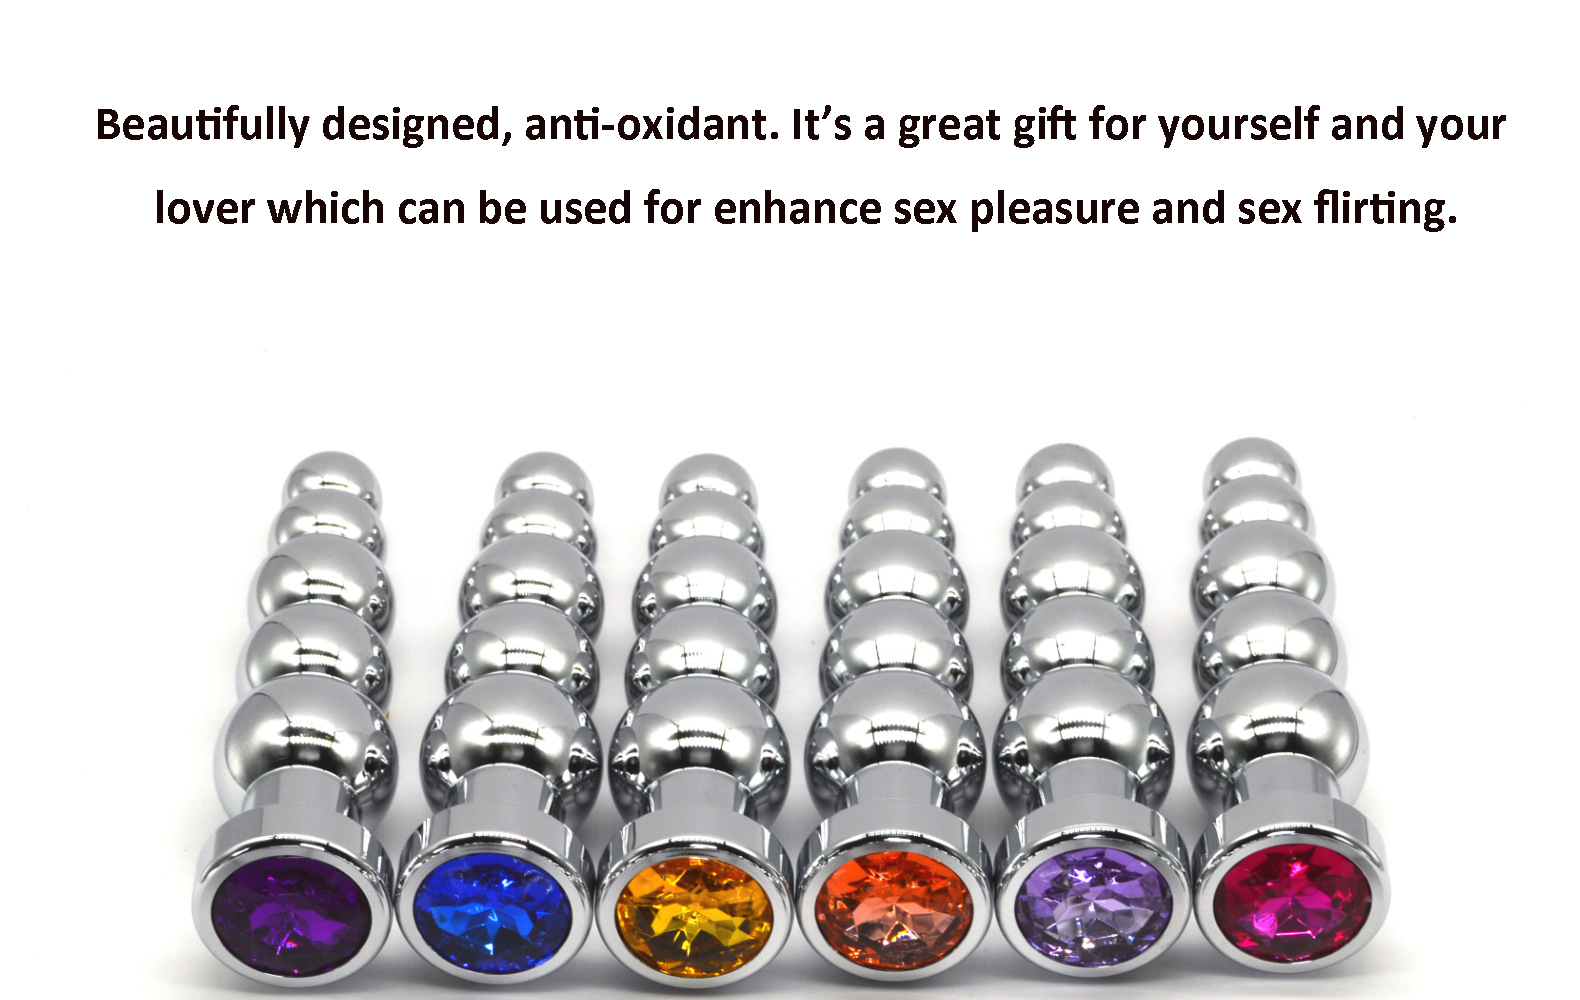 Anal Beads, Colorful Jewelry Metal Butt Plug Anal Trainer Toys with 5 Graduated Balls Fetish Kinky Sex Love Tools for Couple Lover (1)